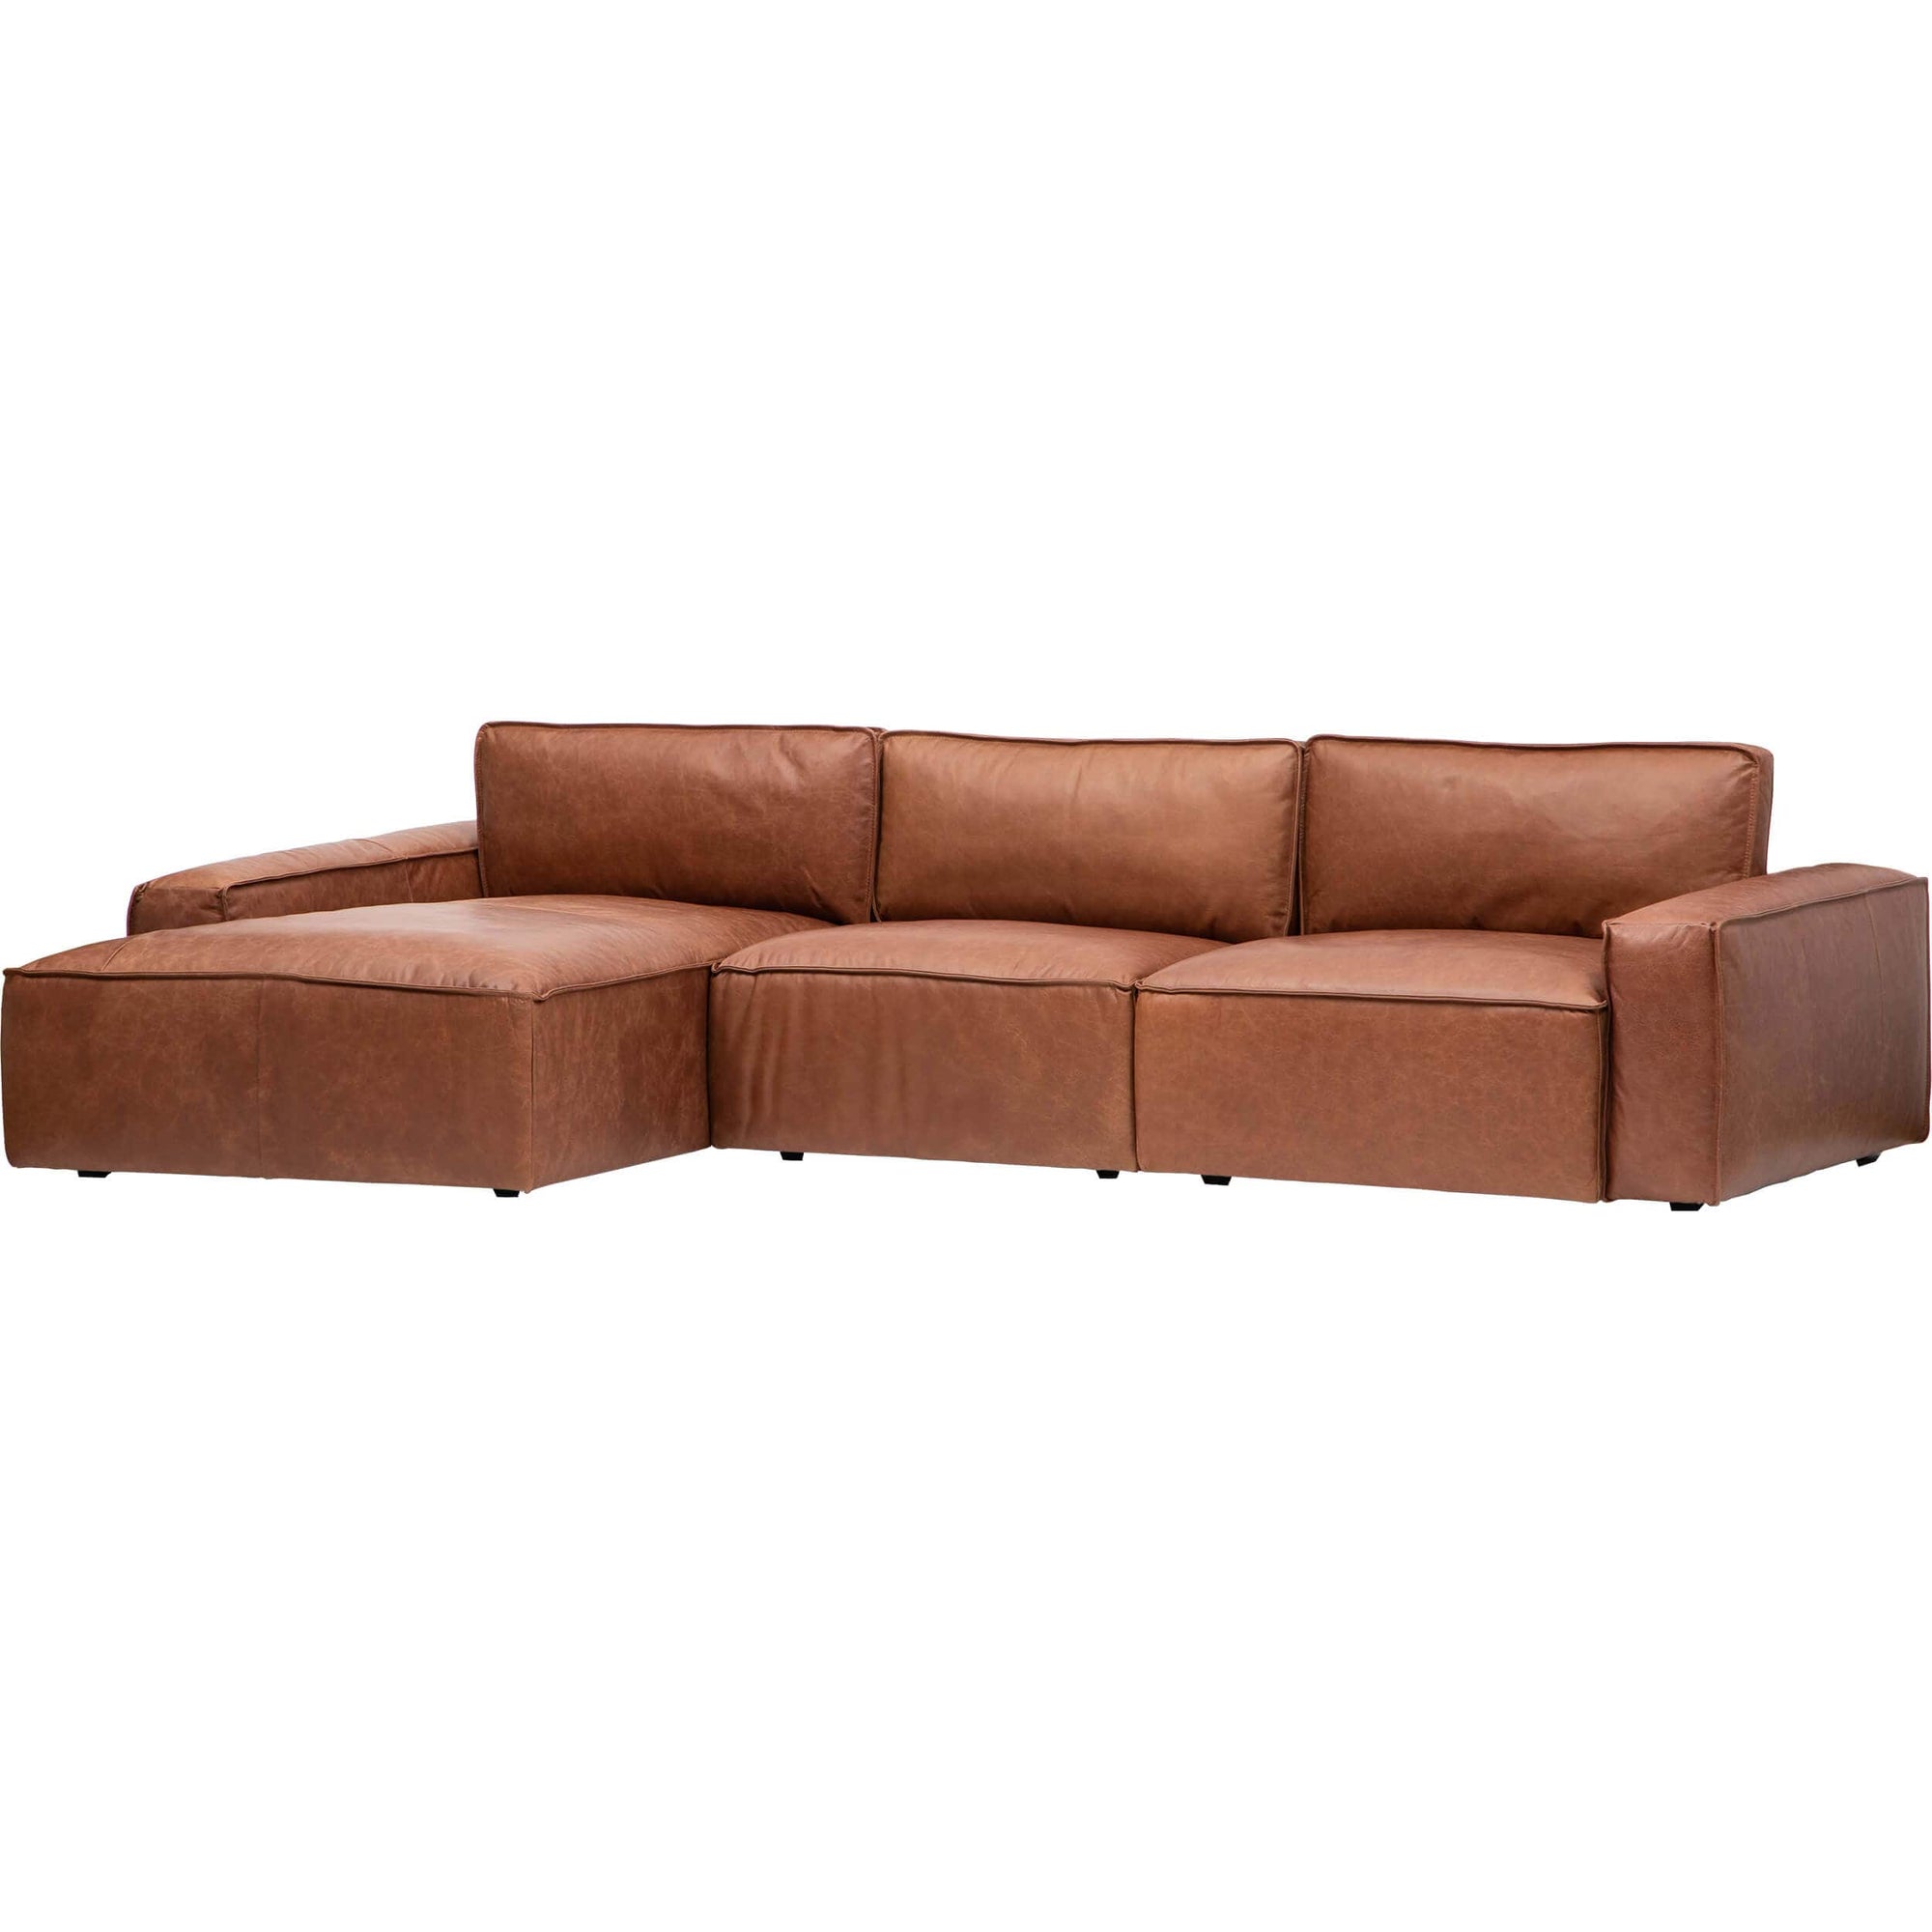 Zion Leather Sectional, Marseille Home High Fashion – Carmel